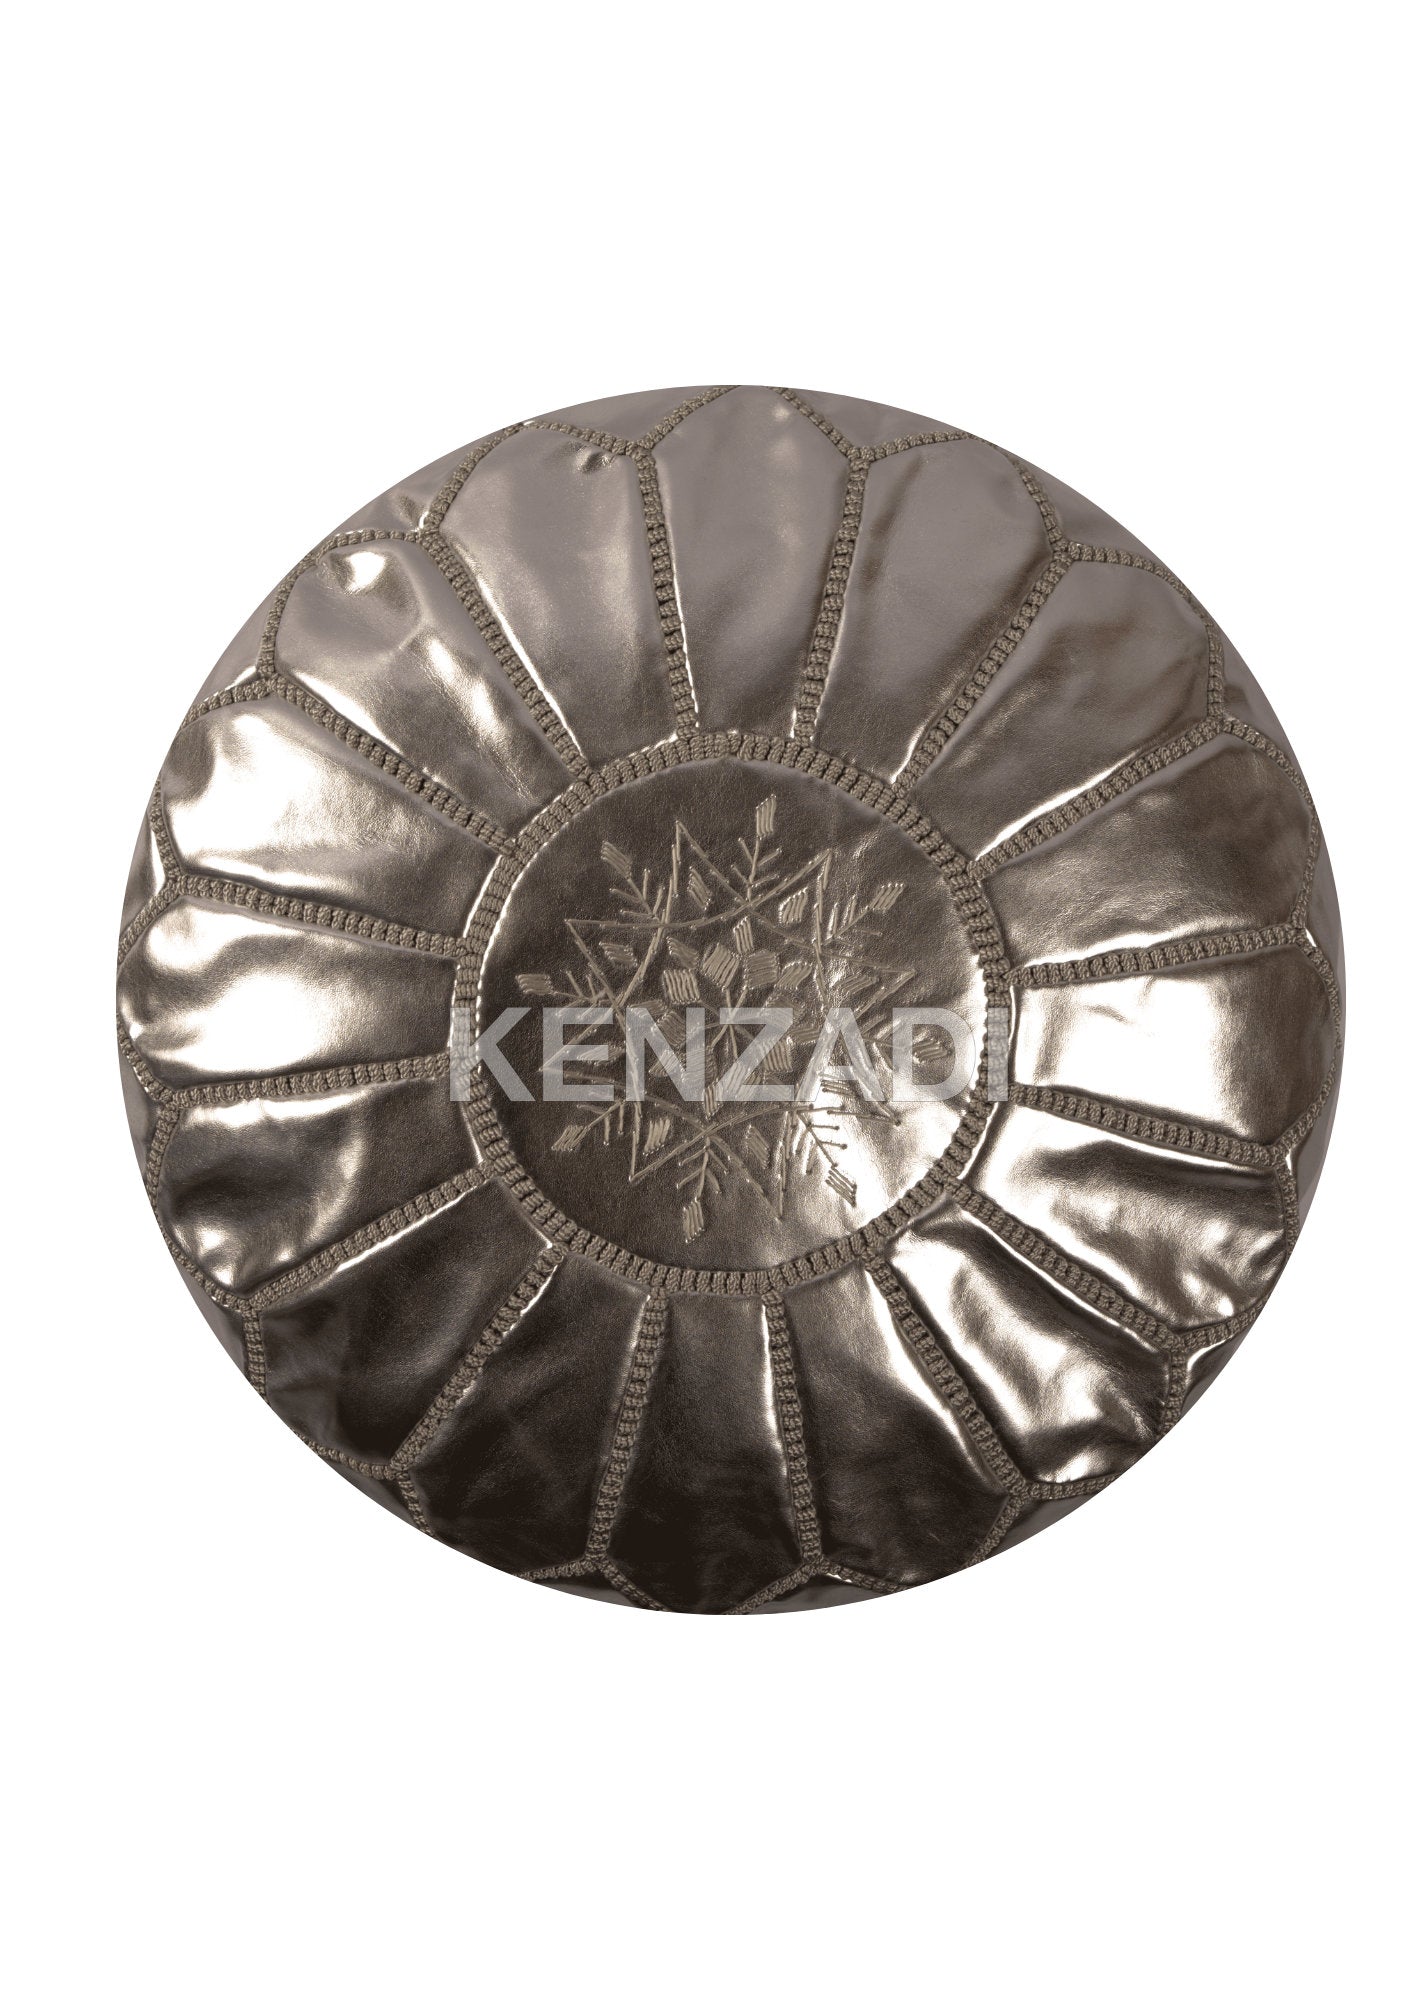 Authentic Moroccan leather pouf with silver grey embroidery  Handmade pouf in premium Berber leather  Versatile pouf that can be used as a footrest, pouf, or coffee table  Perfect for adding a bohemian touch to your décor